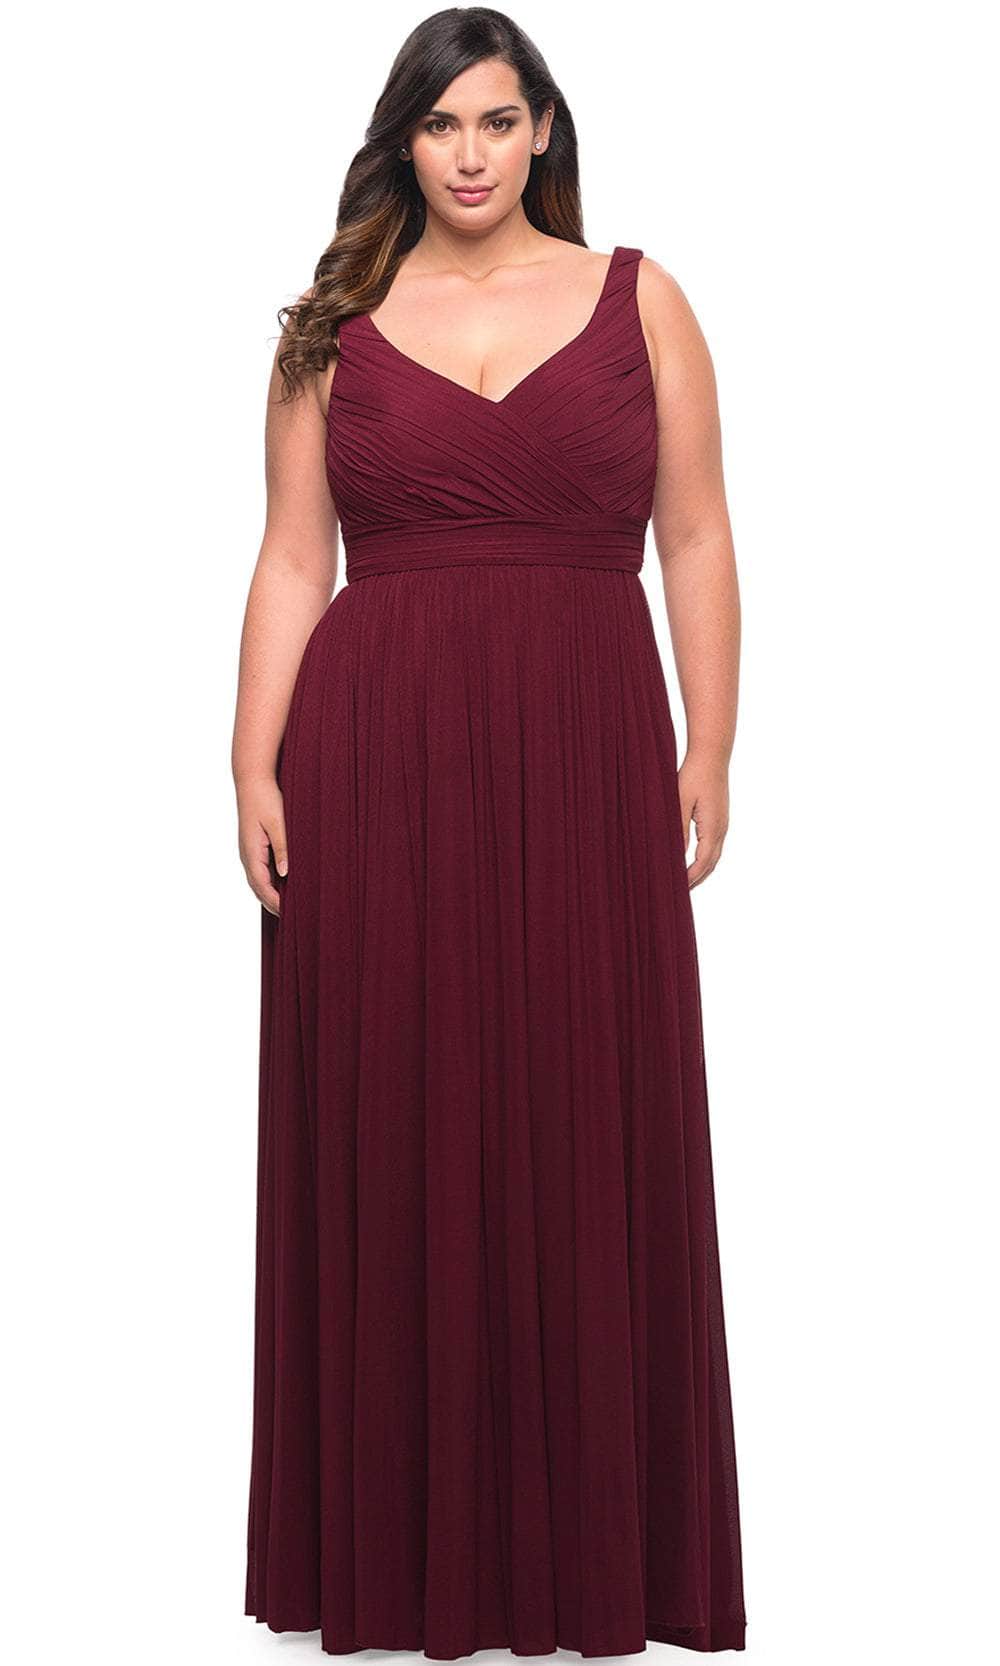 La Femme 29075 - Ruched Sleeveless Prom Gown Special Occasion Dress 12W / Dark Berry